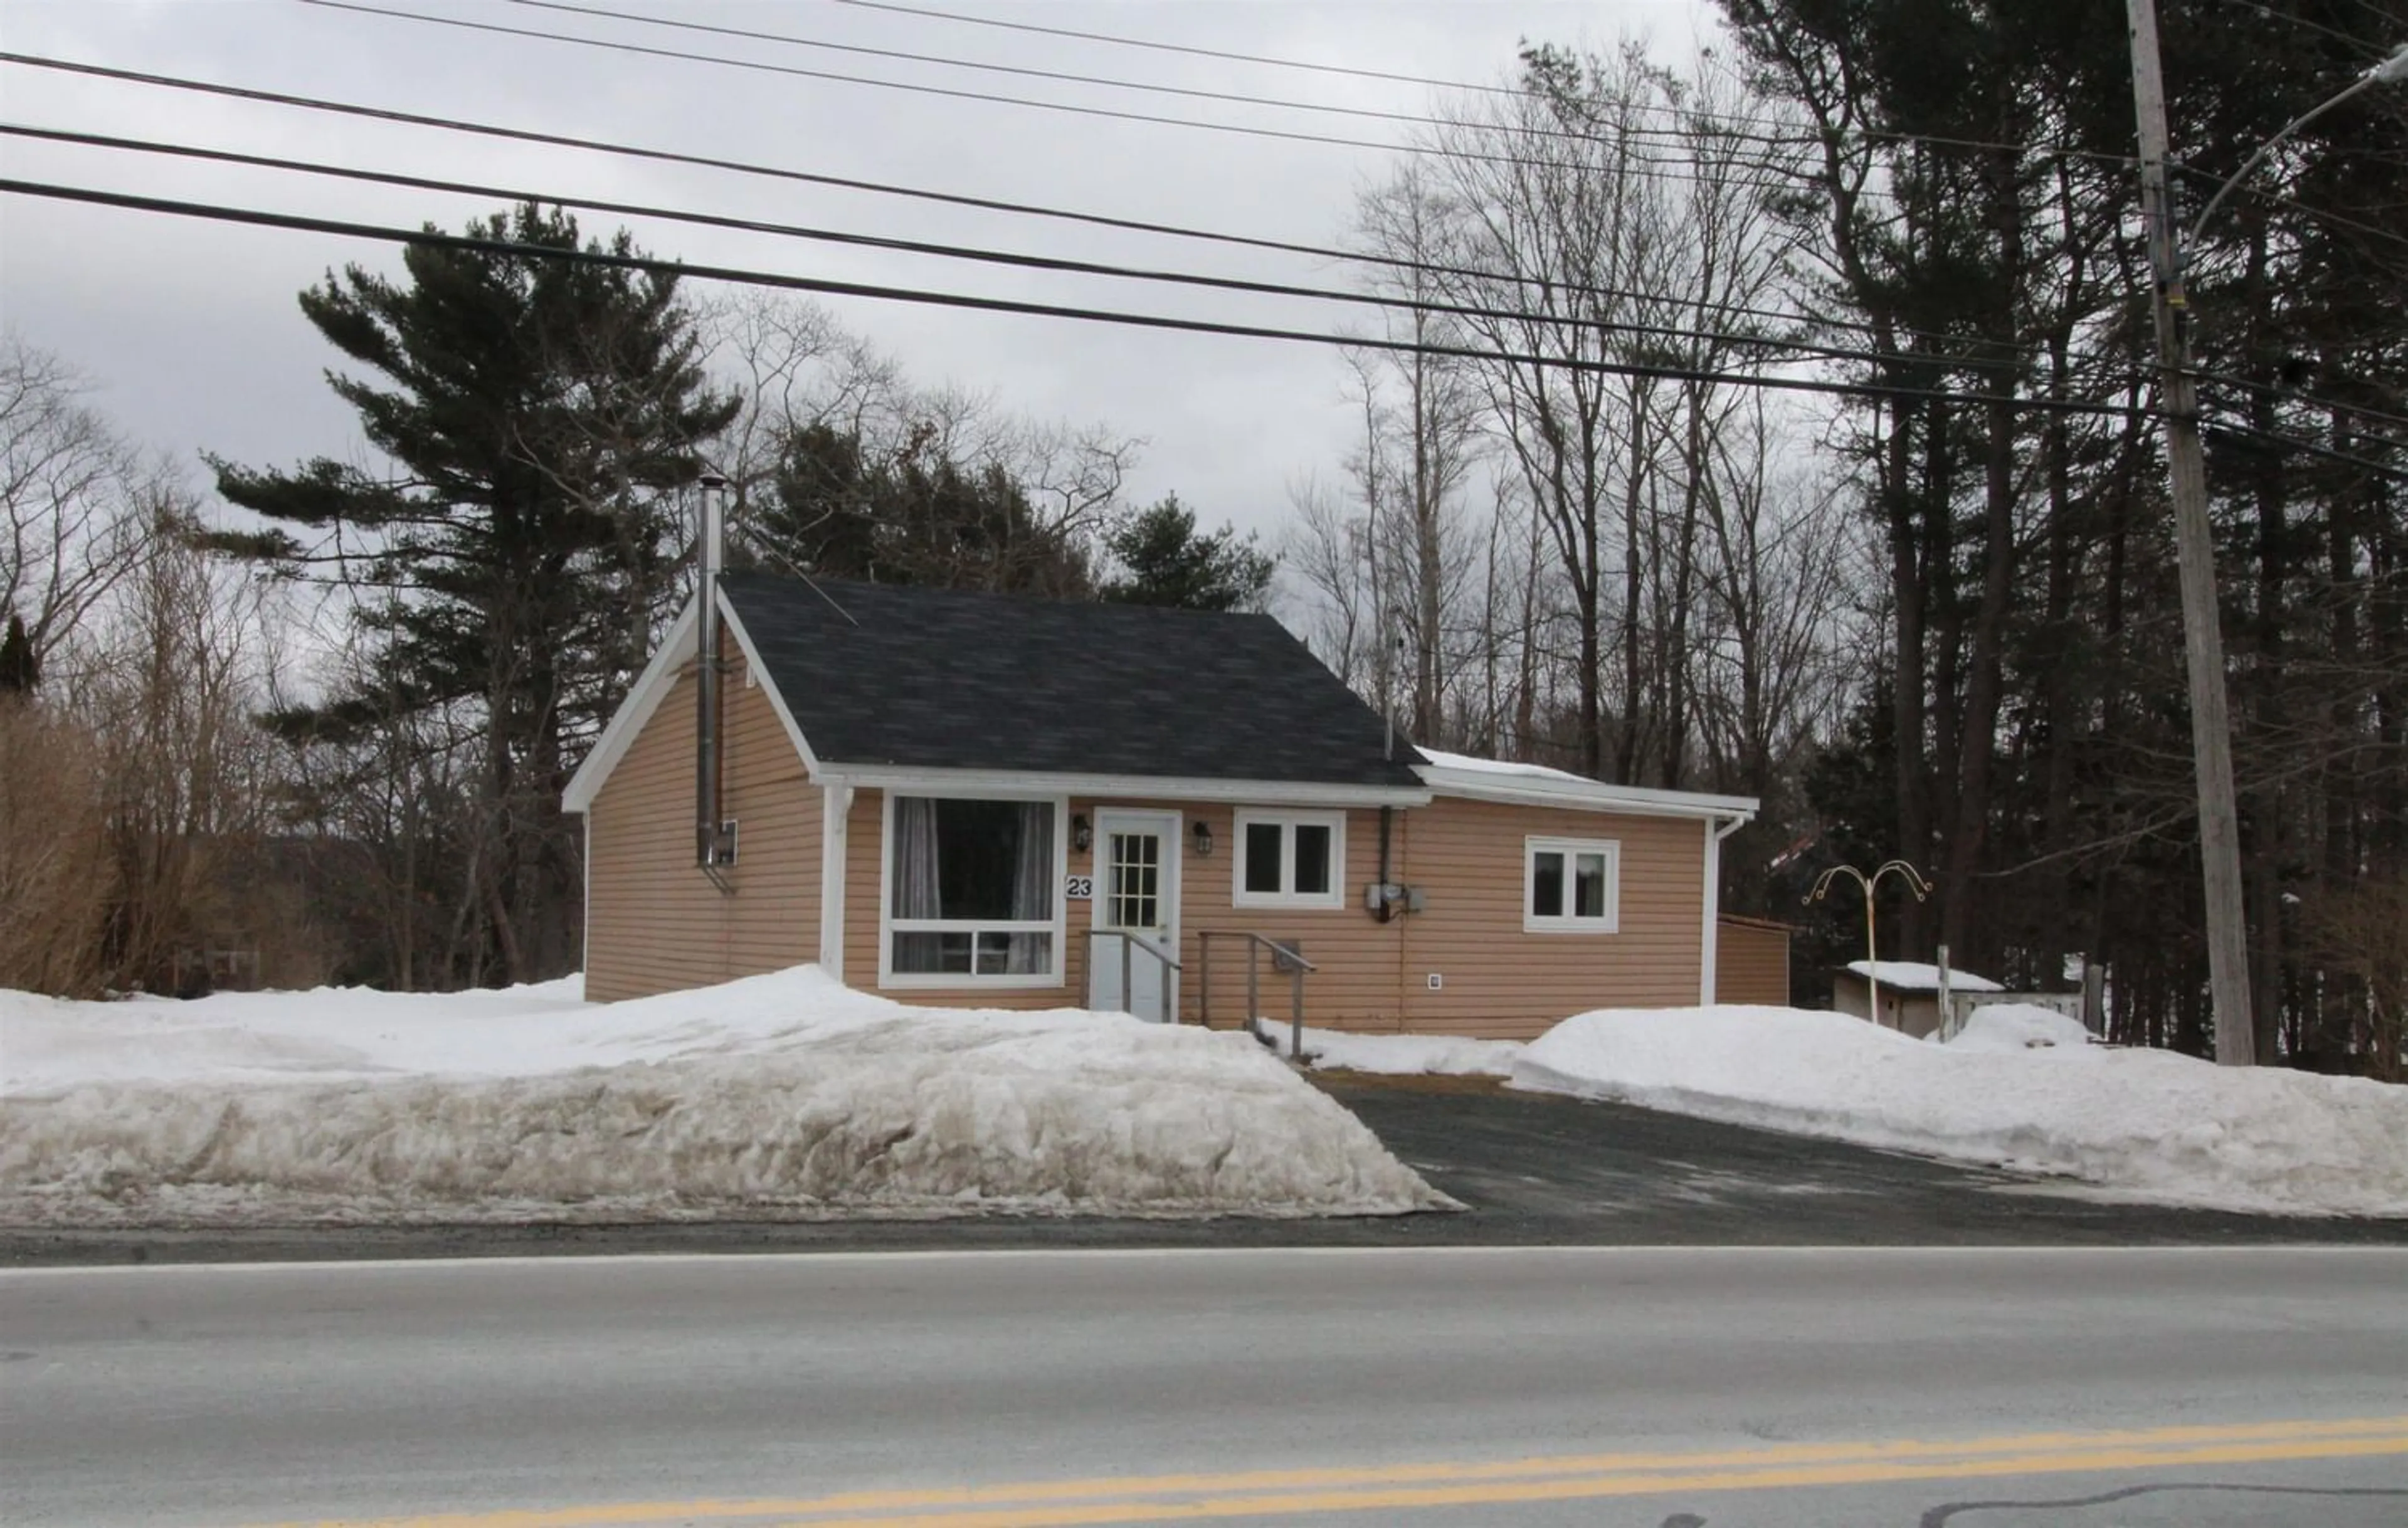 Home with unknown exterior material for 23 Windsor Junction Rd, Windsor Junction Nova Scotia B2T 1G7